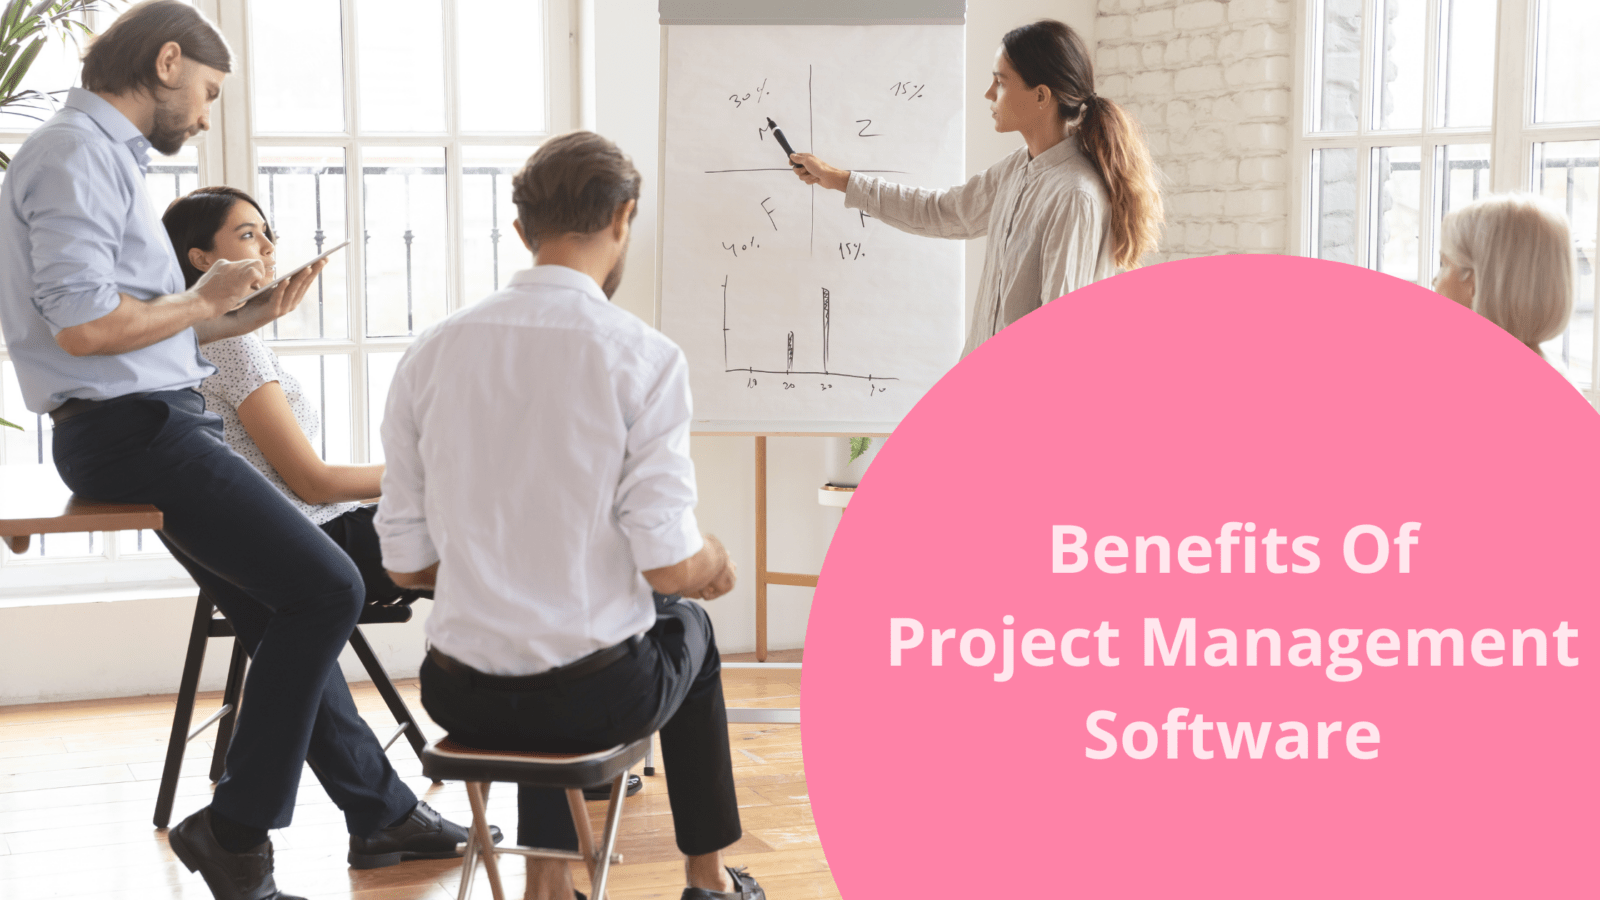 Benefits of project management software